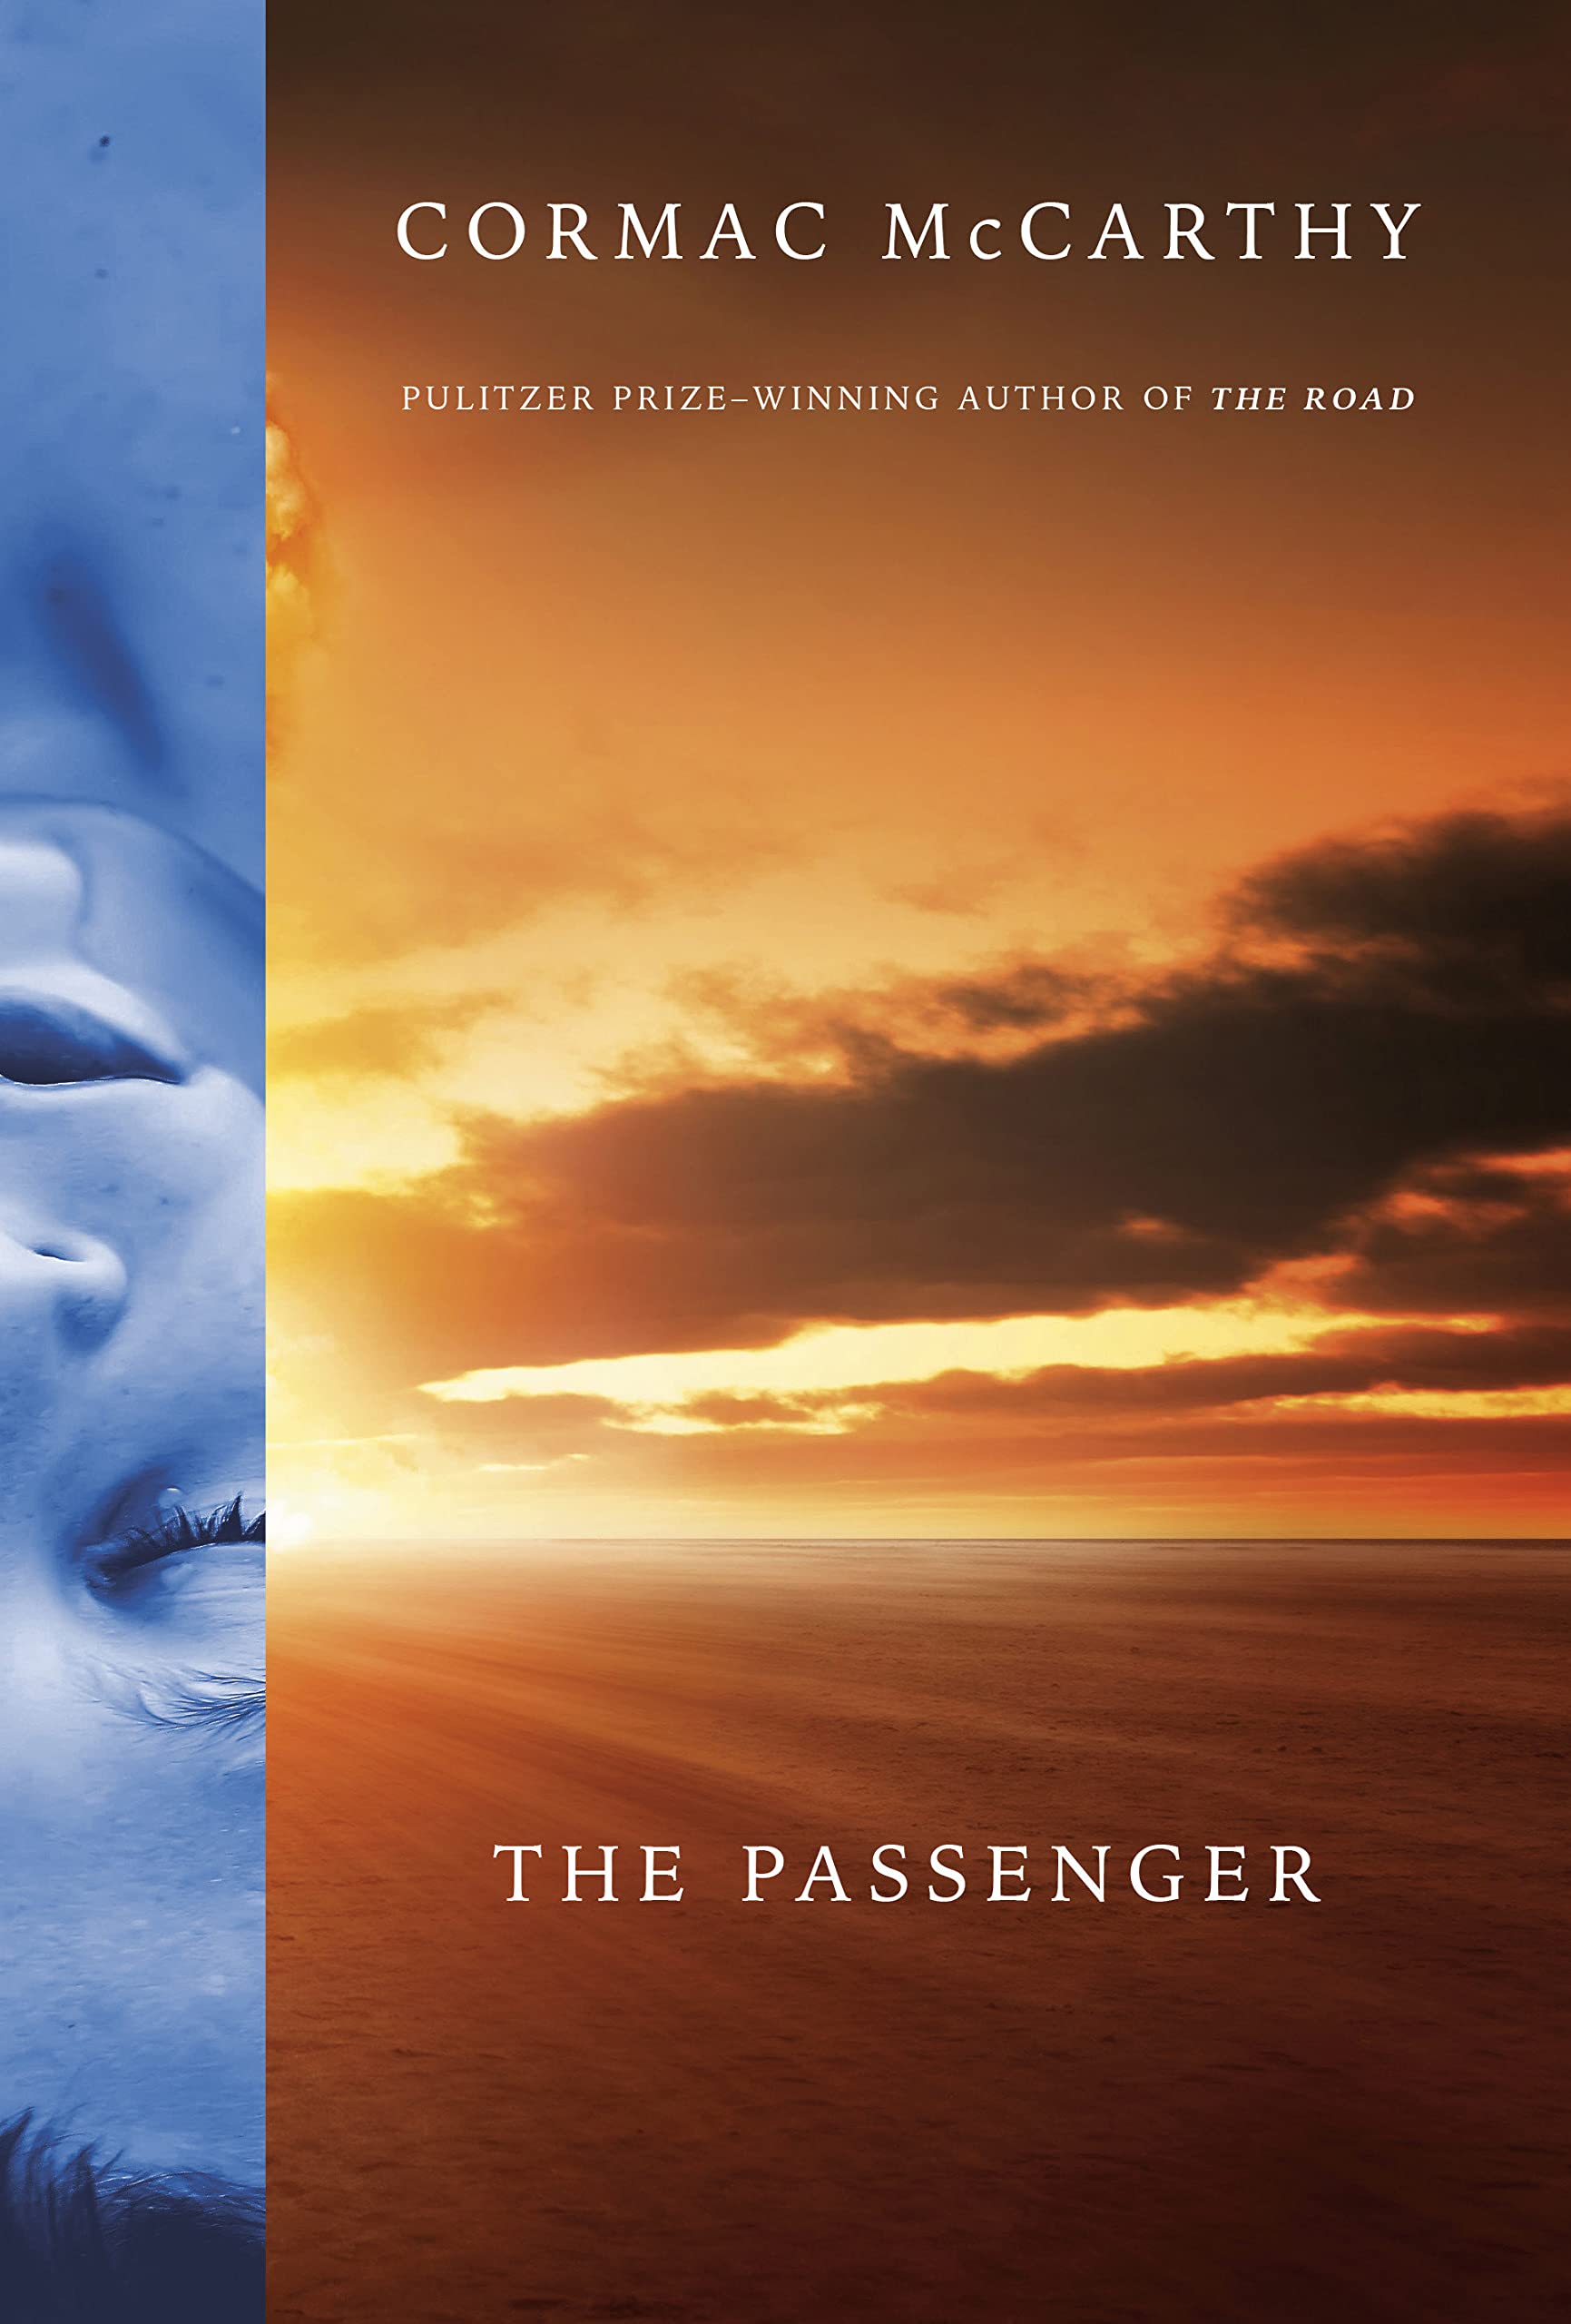 Image for "The Passenger"